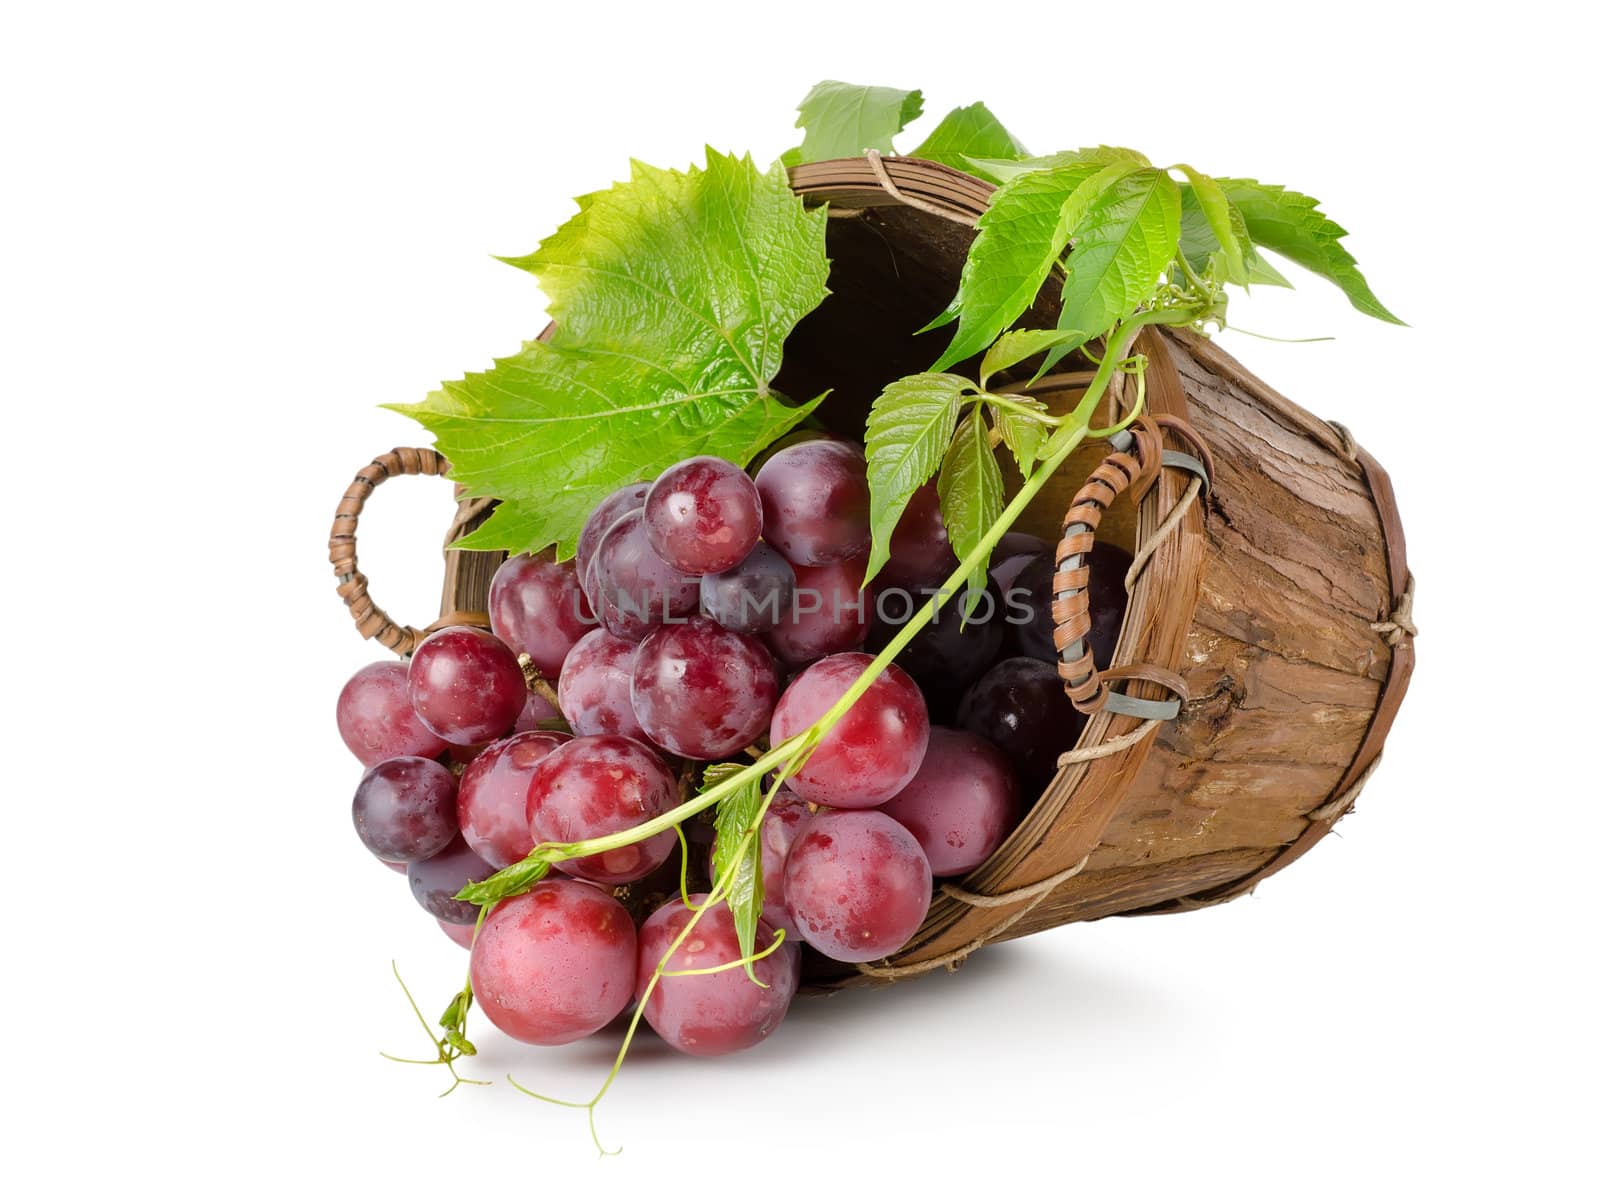 Dark blue grapes in a wooden basket by Givaga